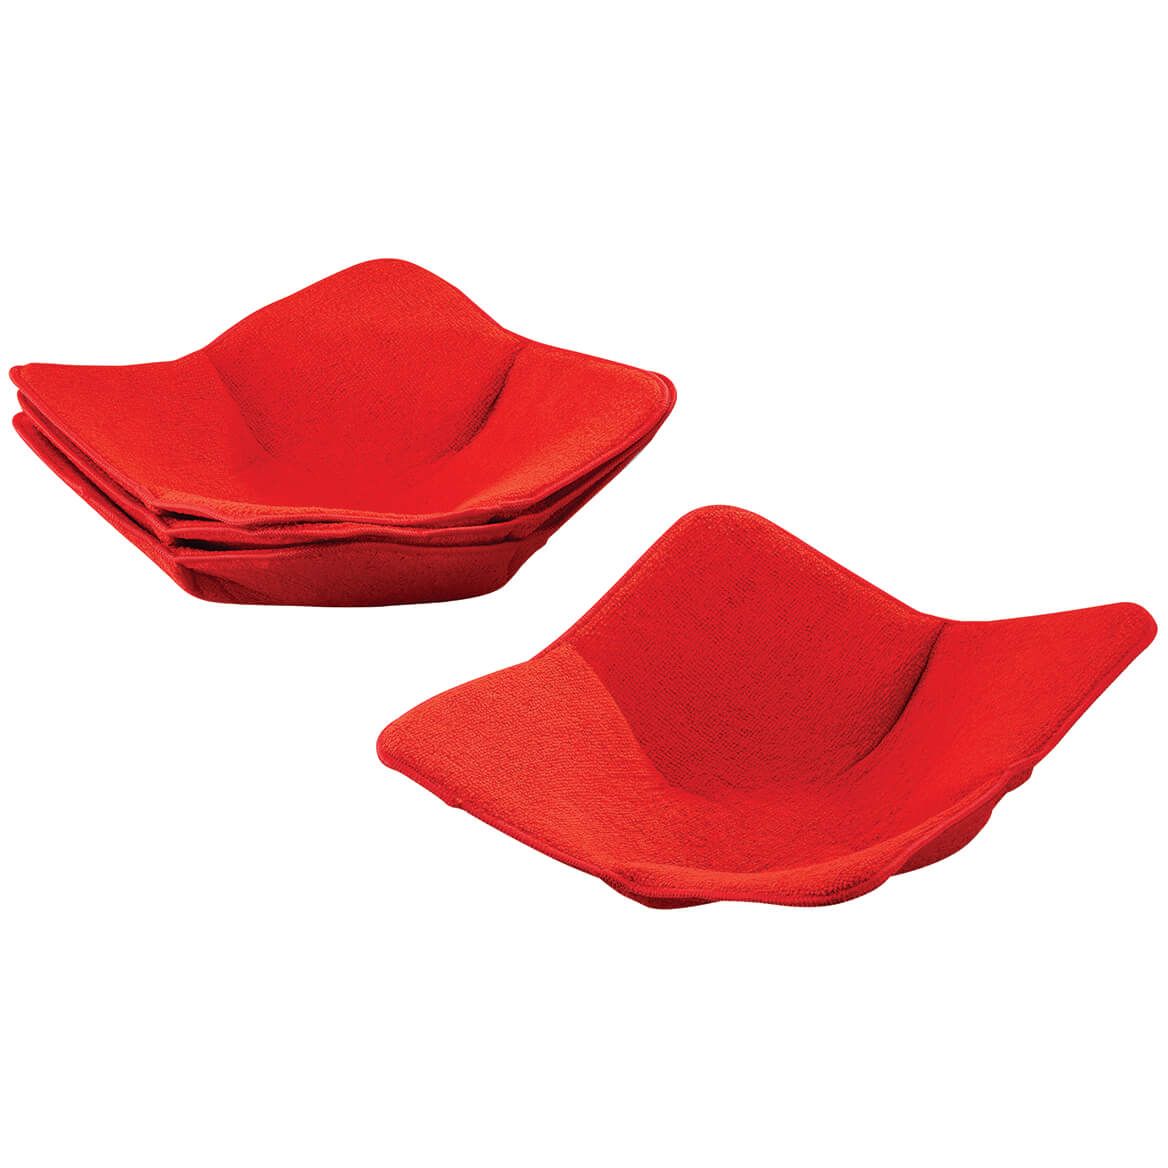 Plate Huggers, Set of 4 by Chef's Pride + '-' + 372364